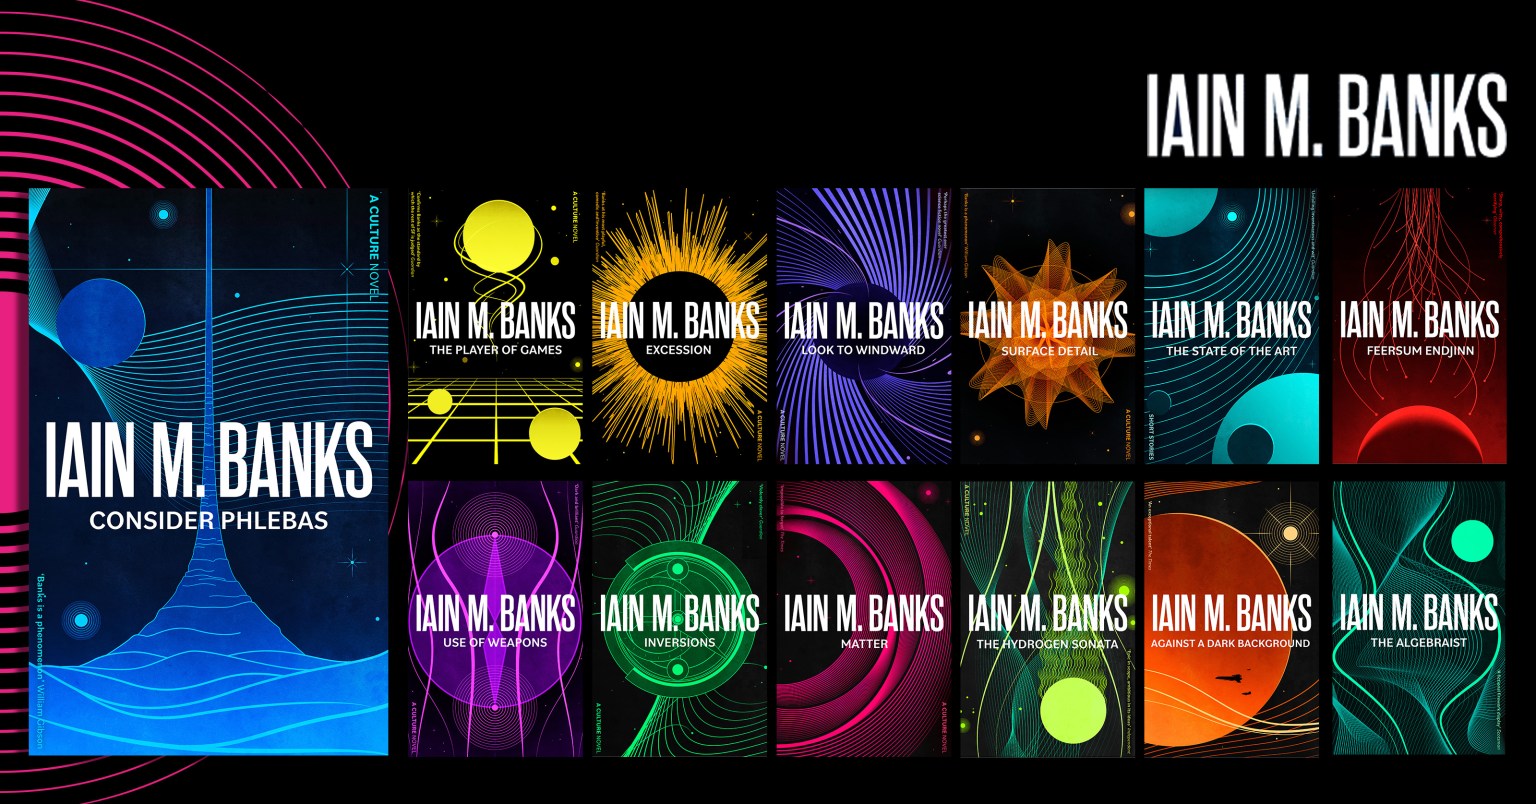 Fans of the Culture novels by Iain M Banks